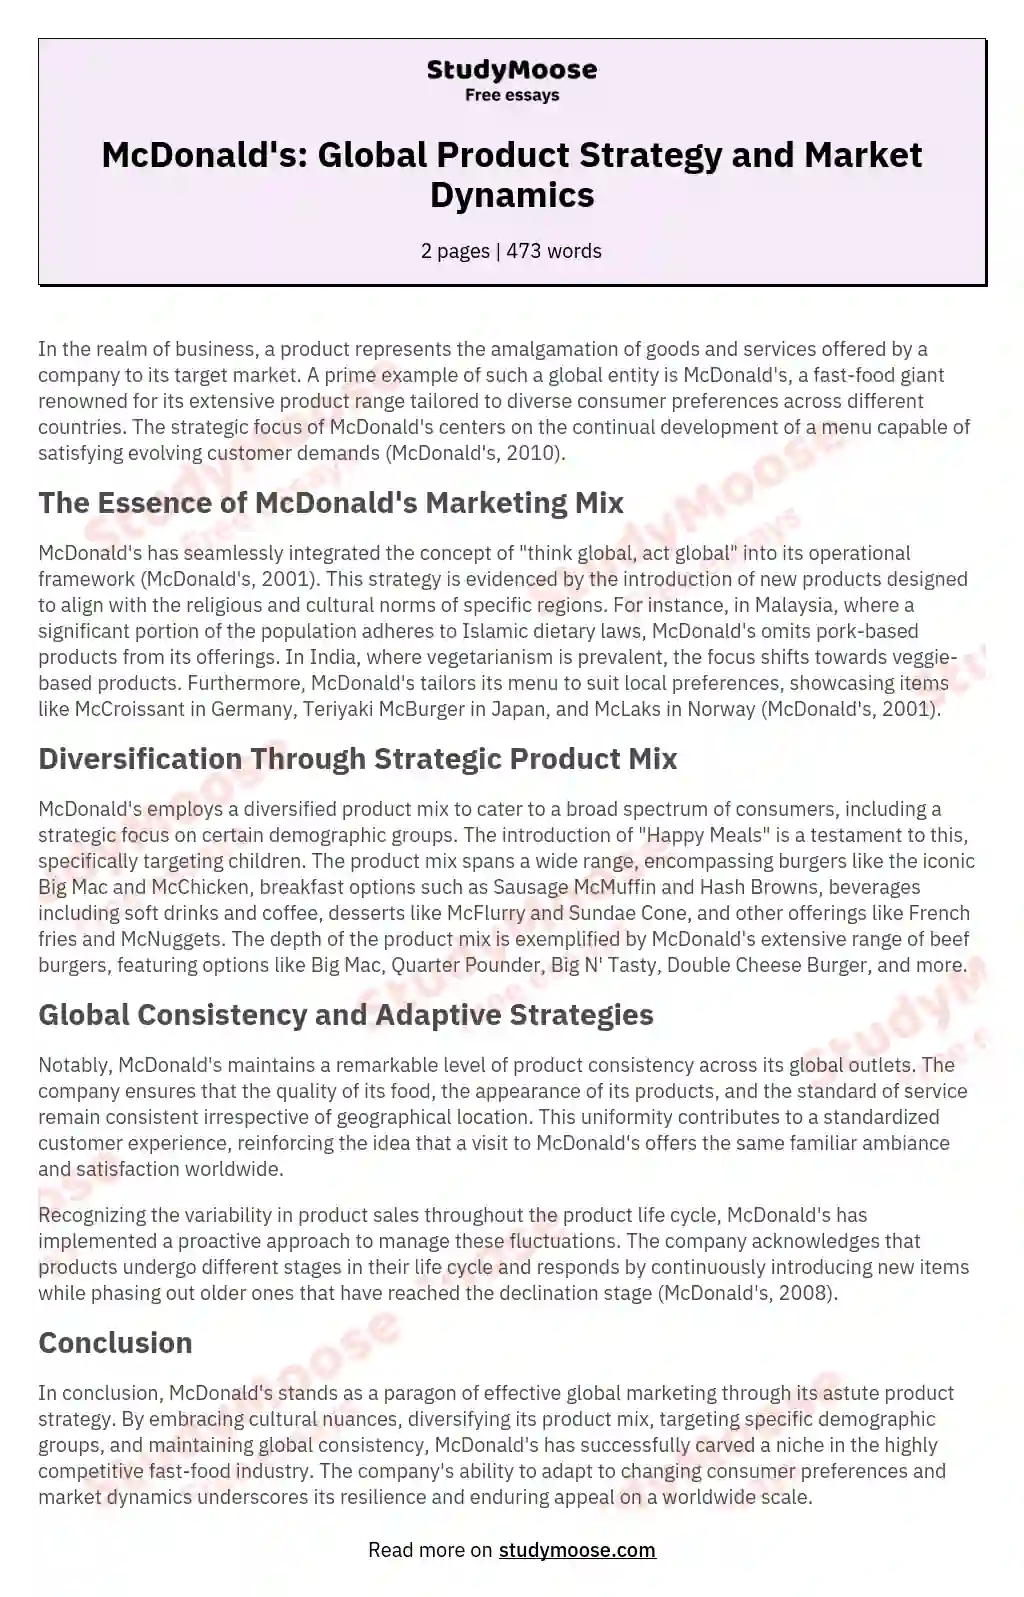 McDonald's: Global Product Strategy and Market Dynamics essay